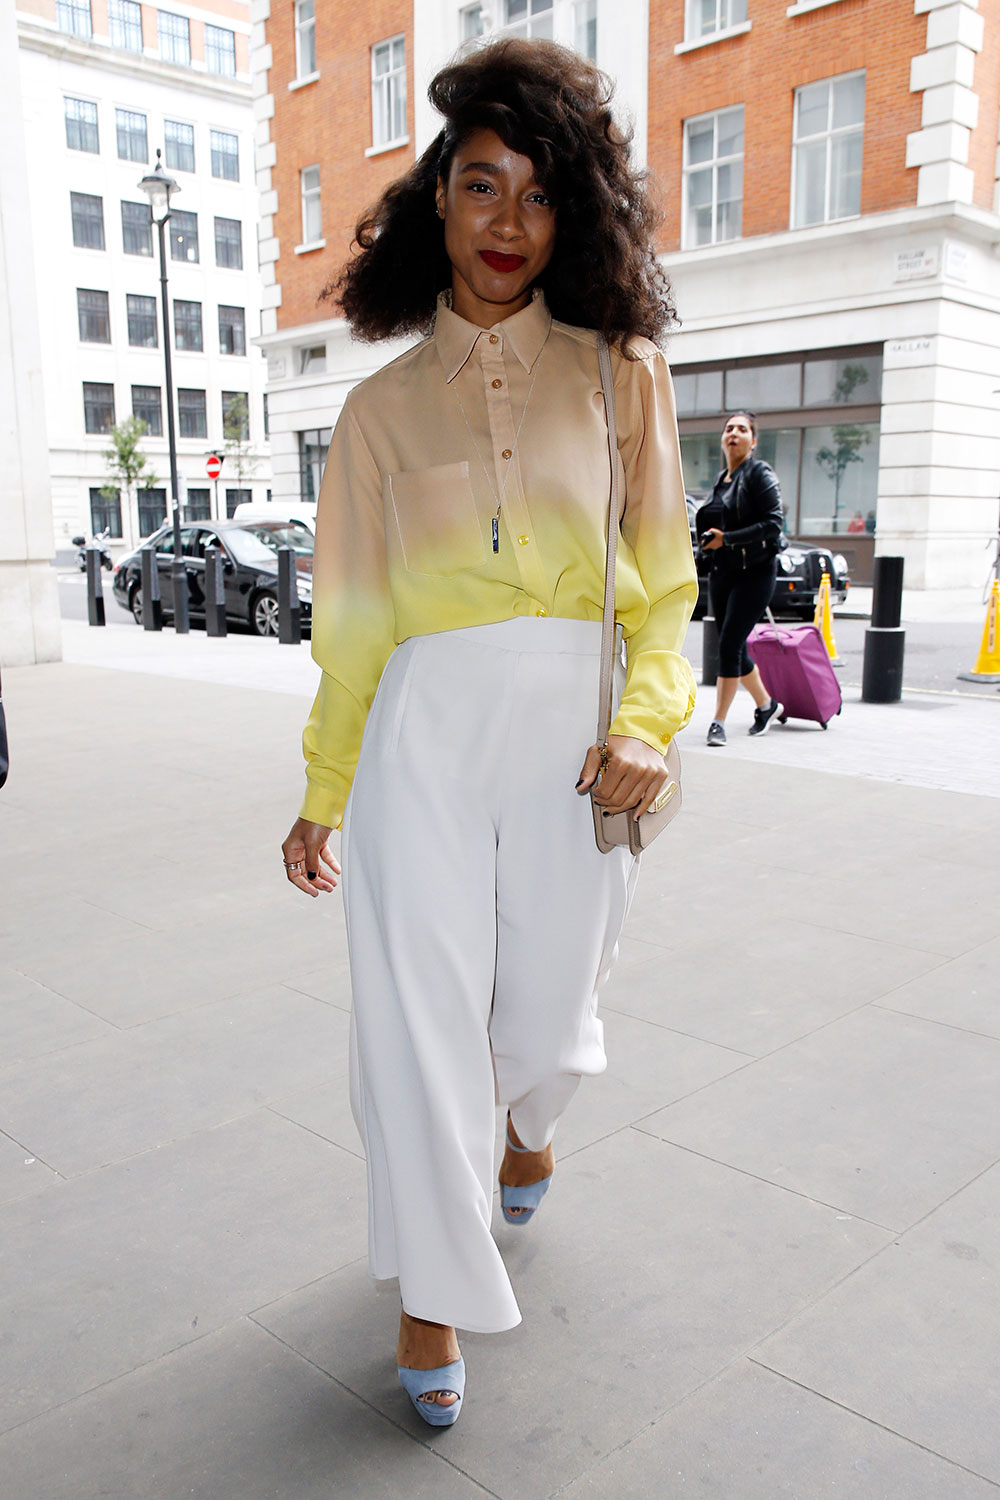 Singer Lianne La Havas arrives at the BBC Radio 1 Studios - we are digging those white wide-legged pants! Photo / Getty Images